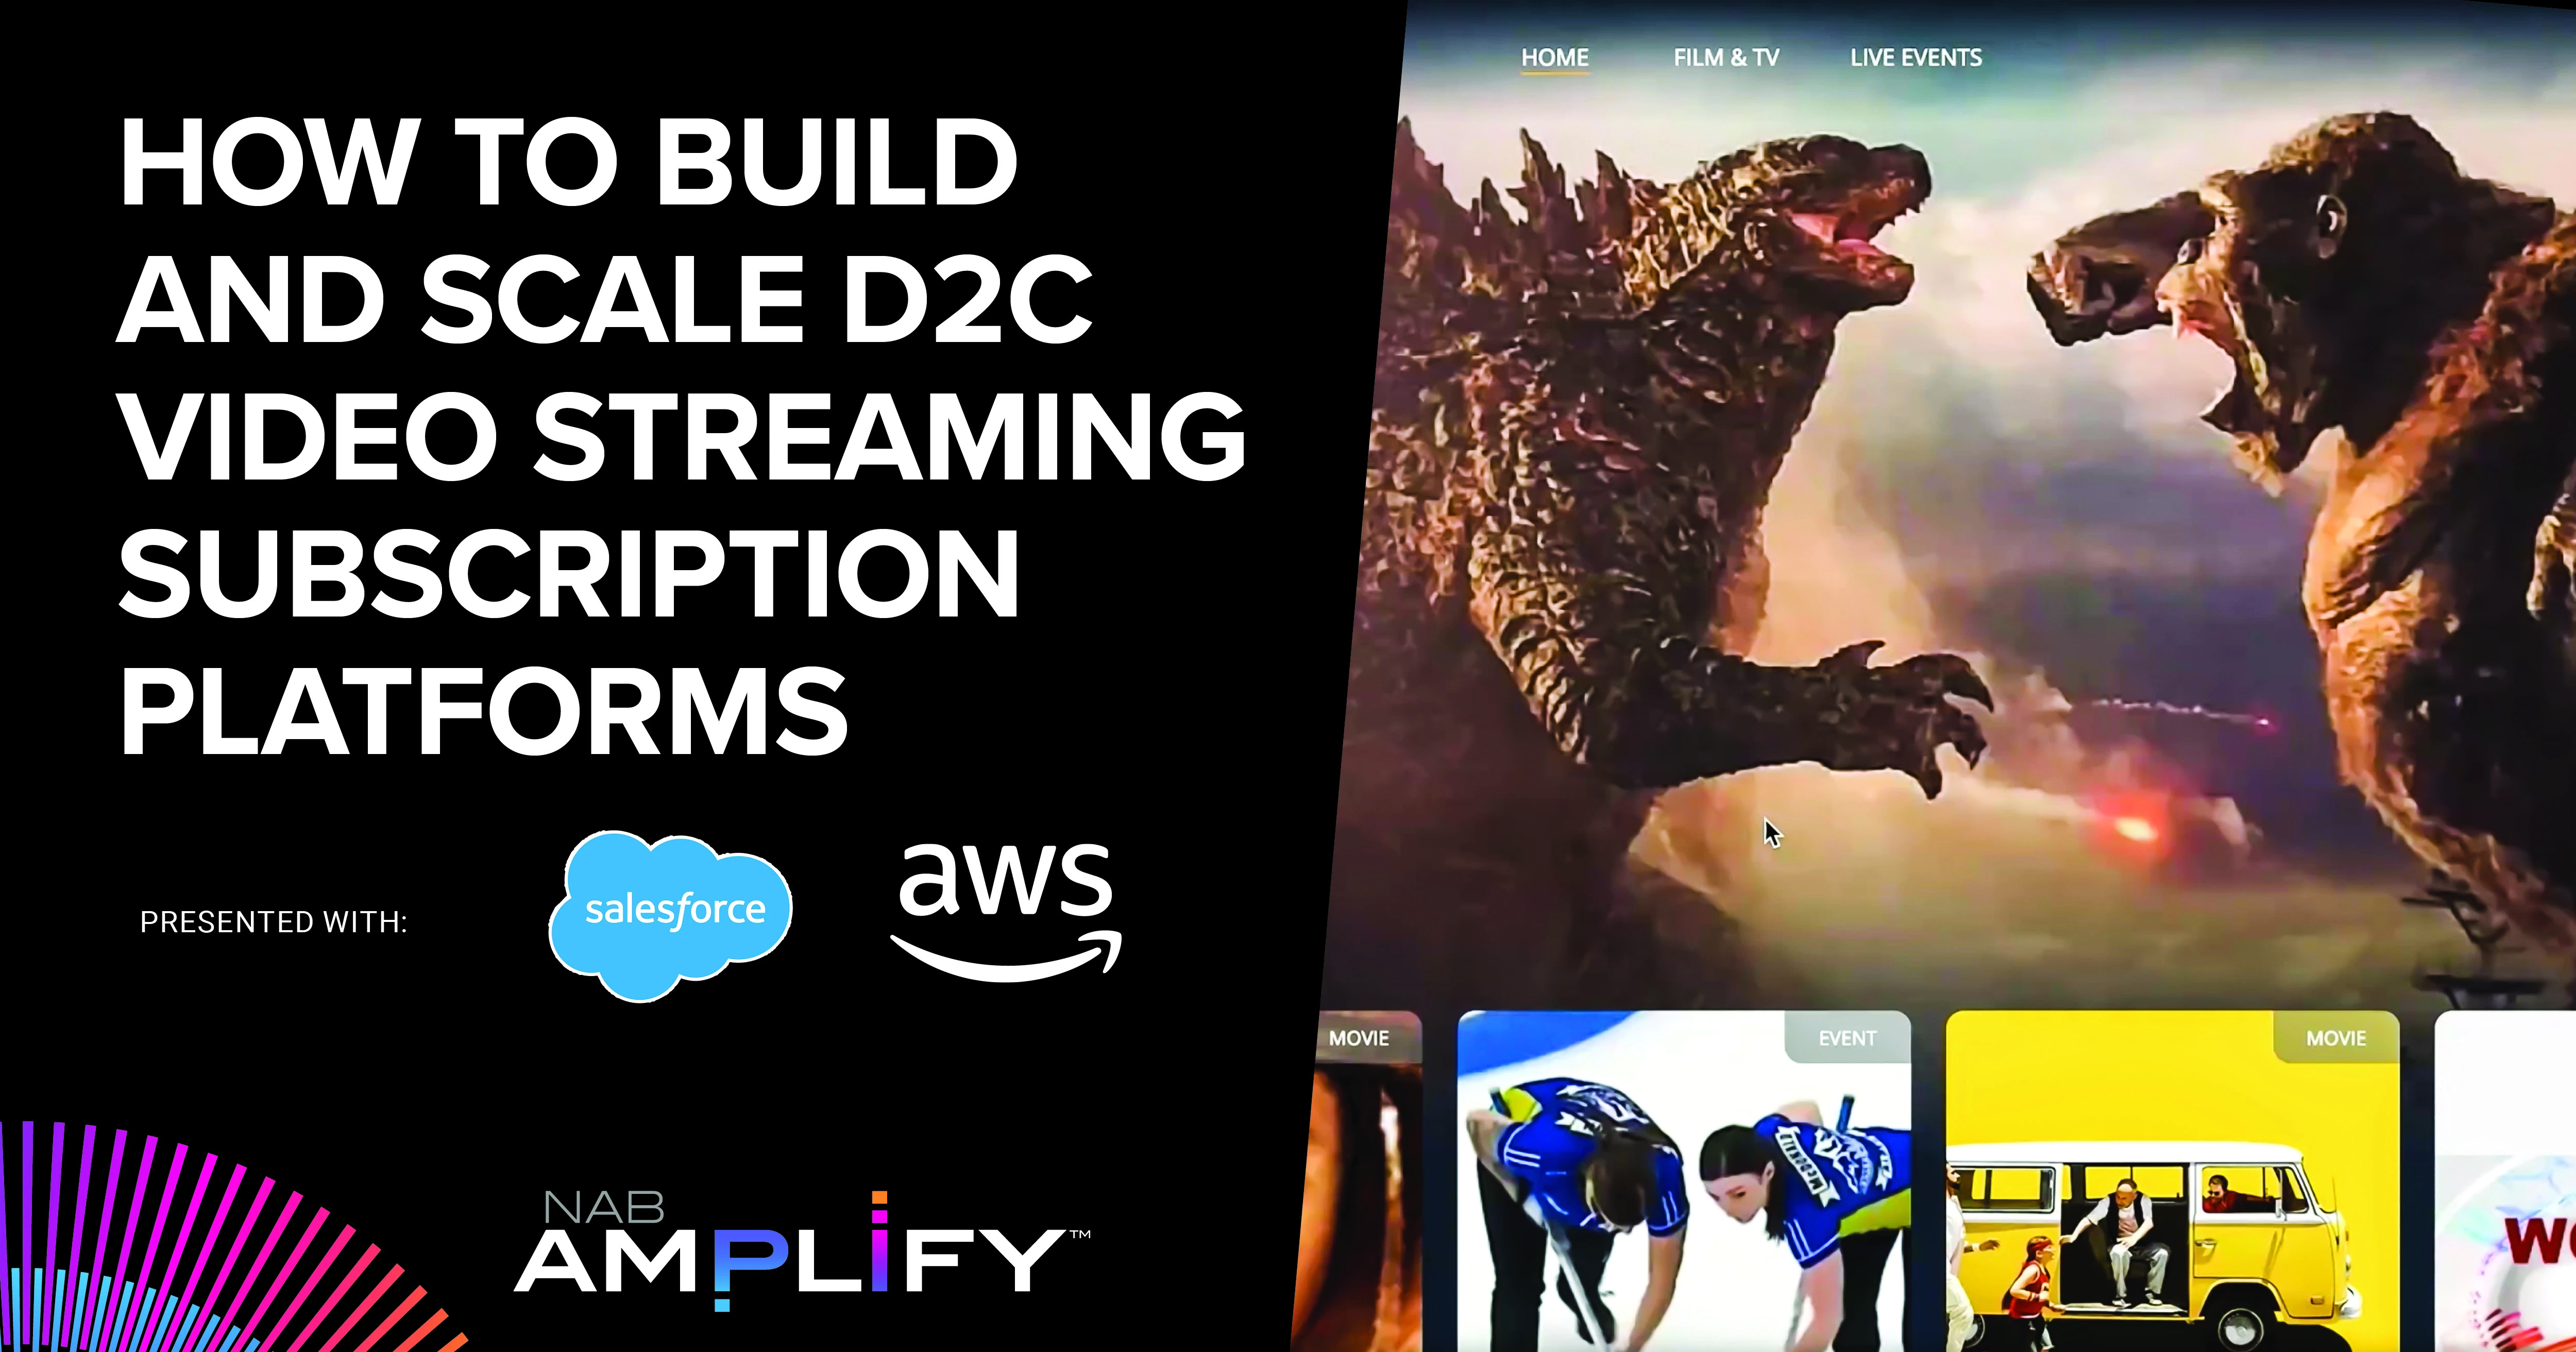 How to Build and Scale D2C Video Streaming Subscription Platforms